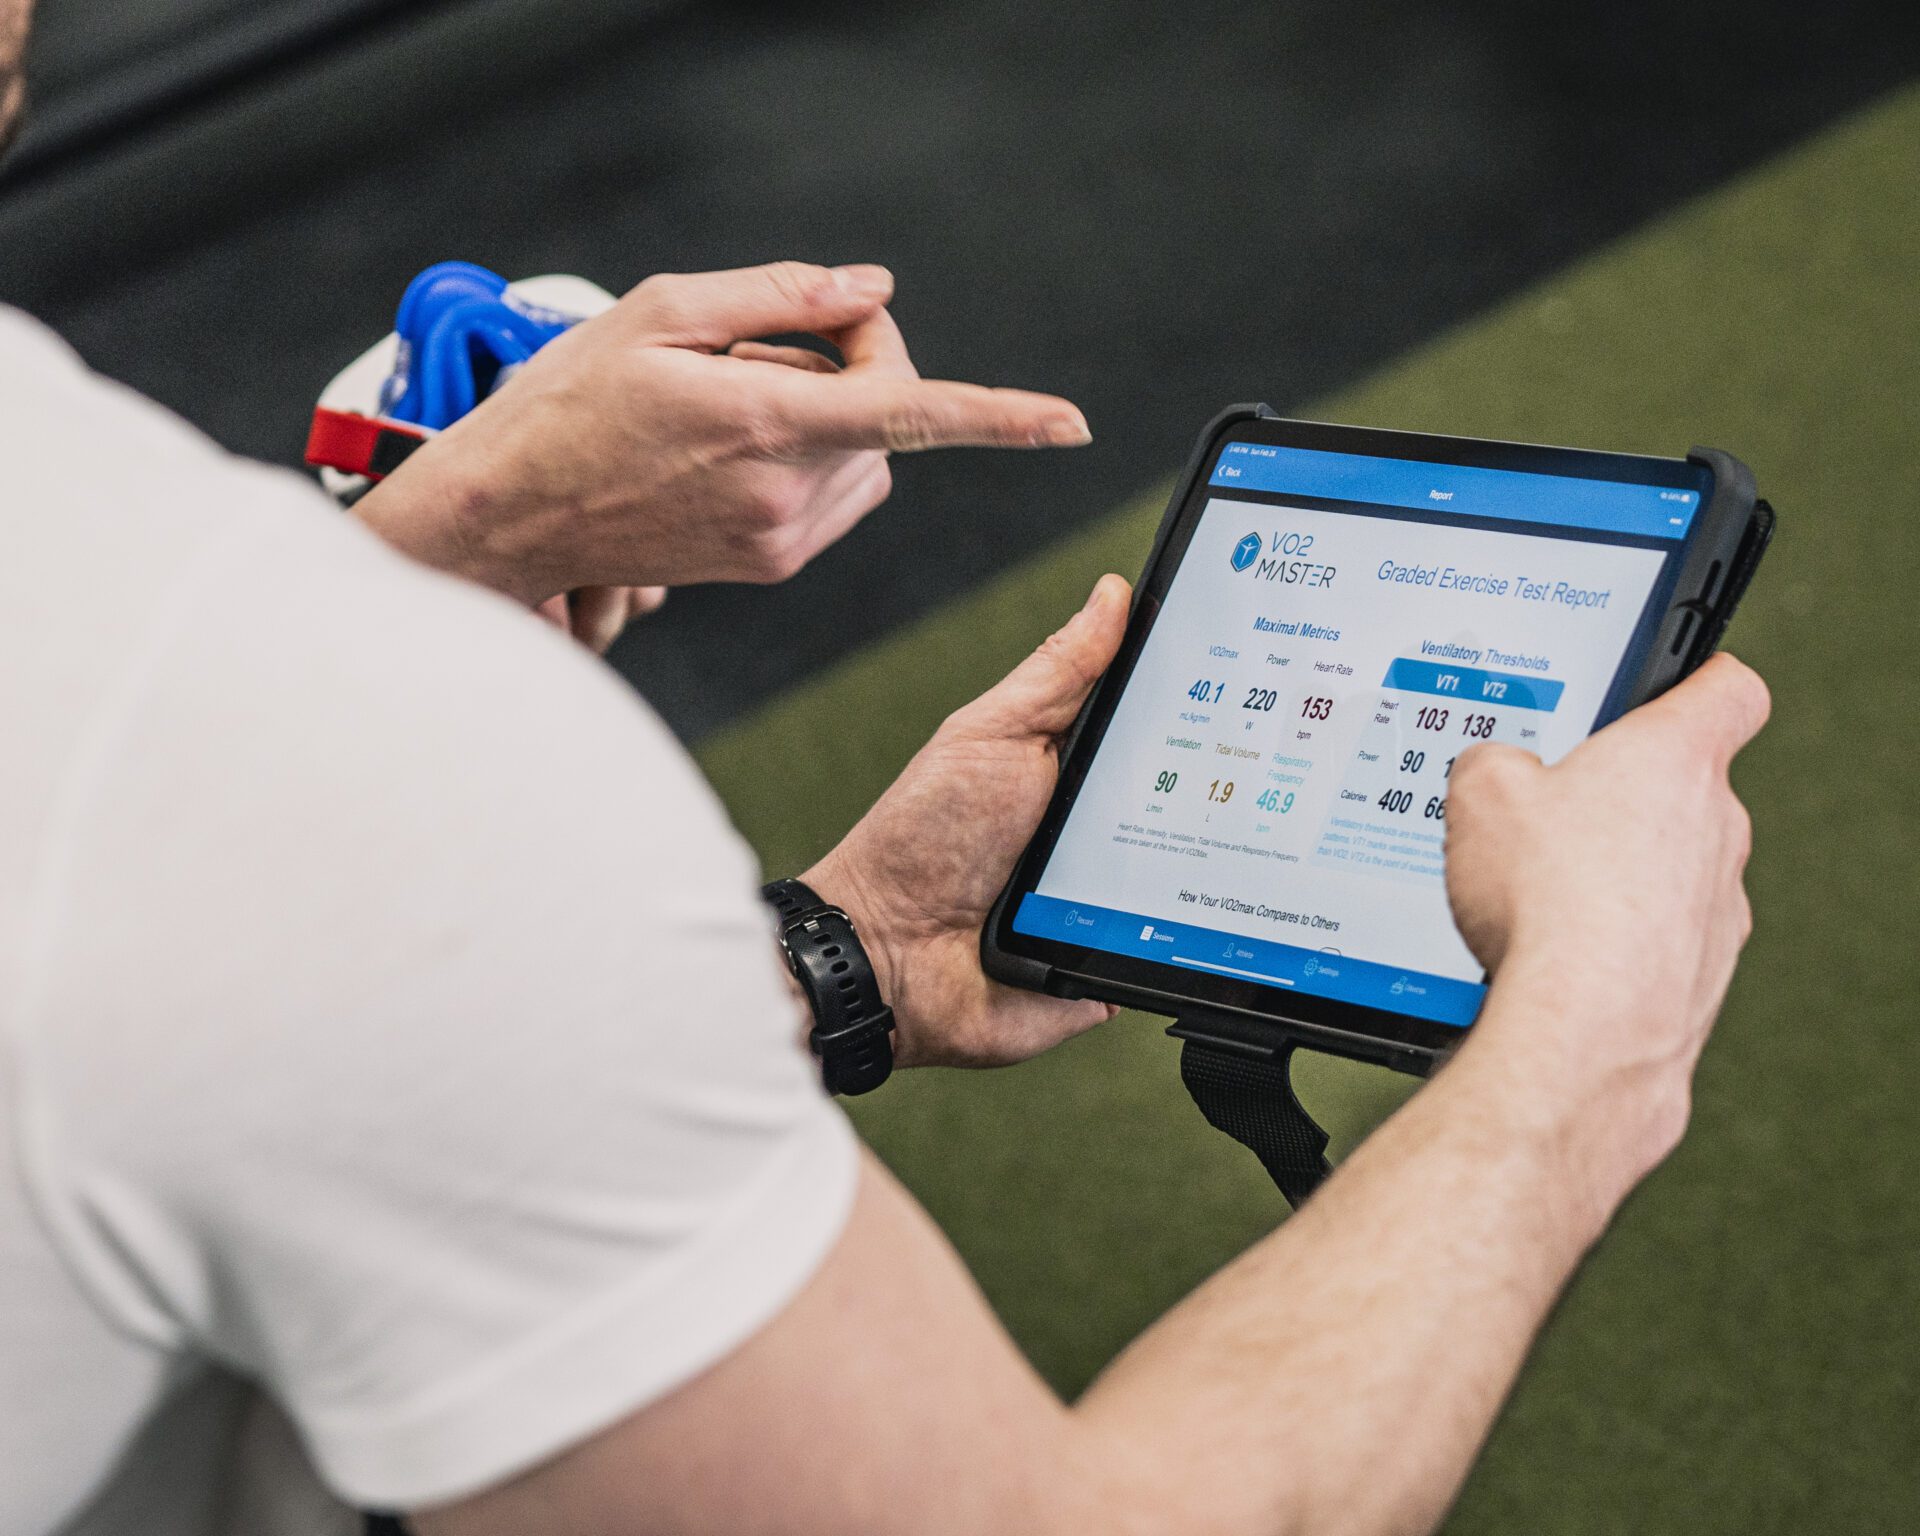 Athlete observing performance results on the VO2 Master iPad app